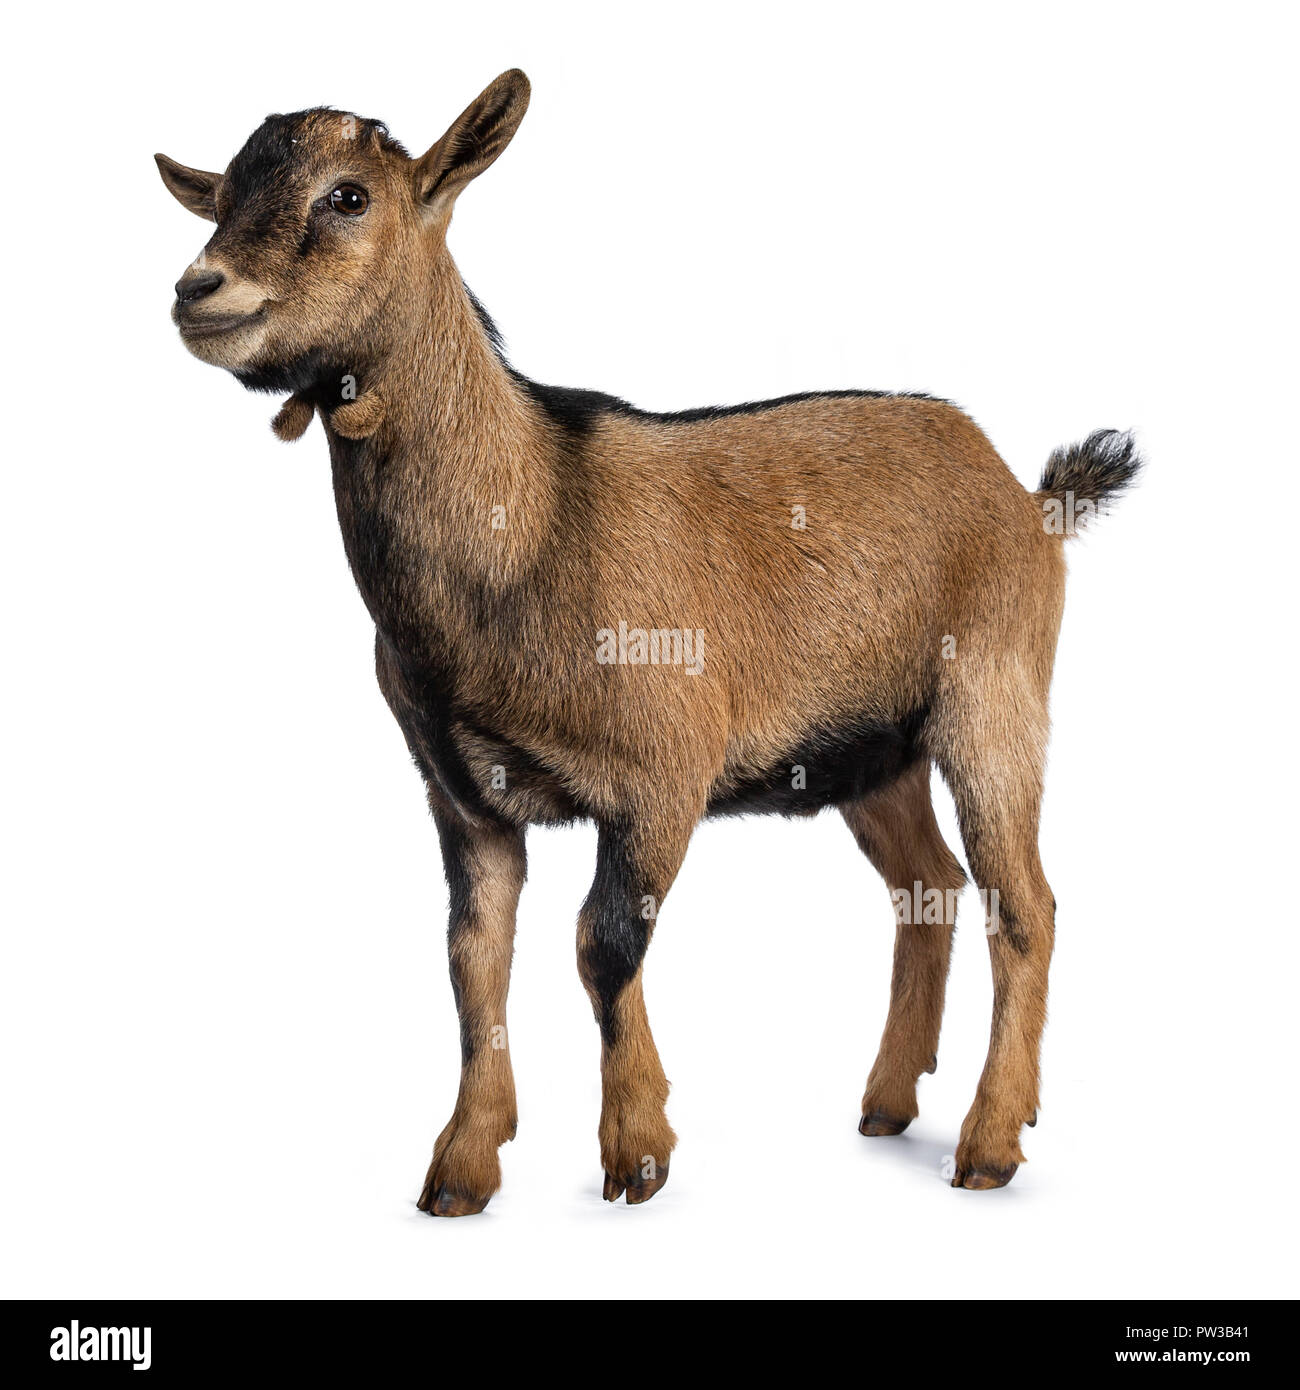 Brown agouti pygmy goat standing side way looking to camera, isolated on white background Stock Photo